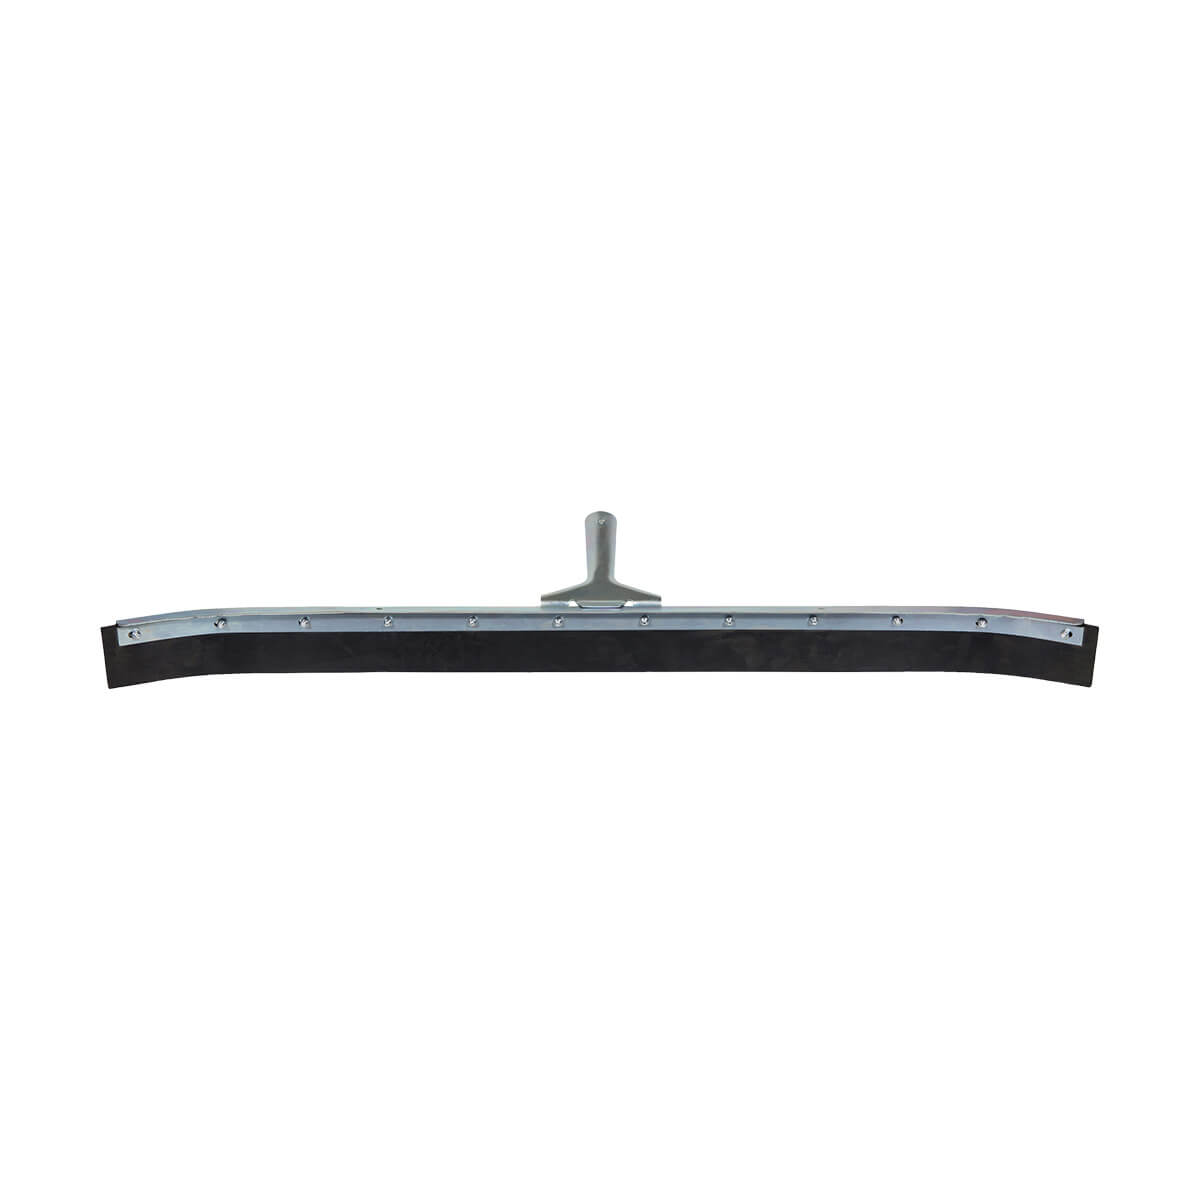 Garant Curved Squeegee Head - 36-in